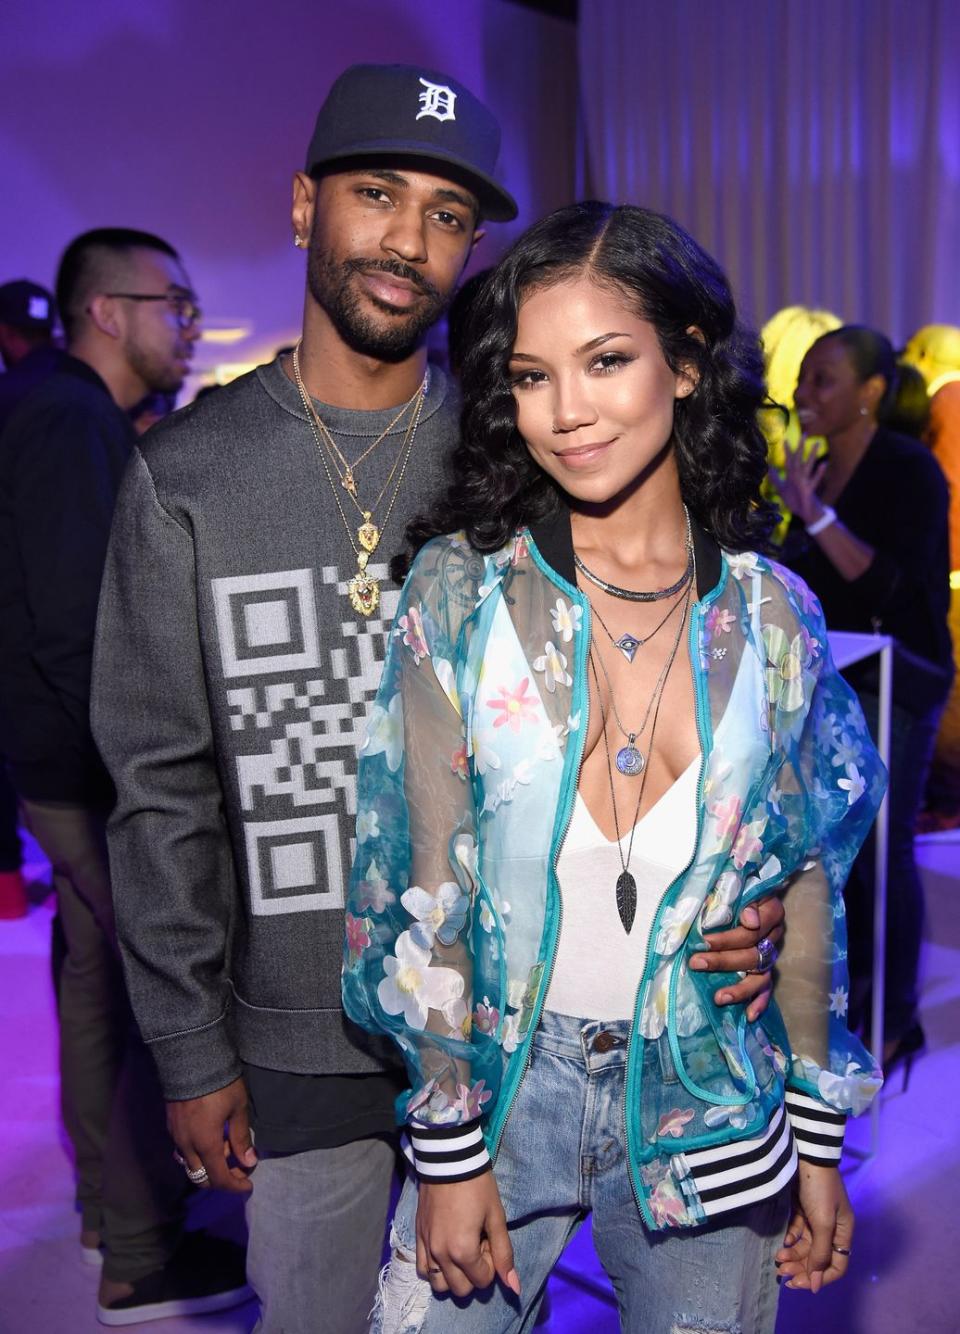 Jhené knows Big Sean is 100% committed to their relationship.